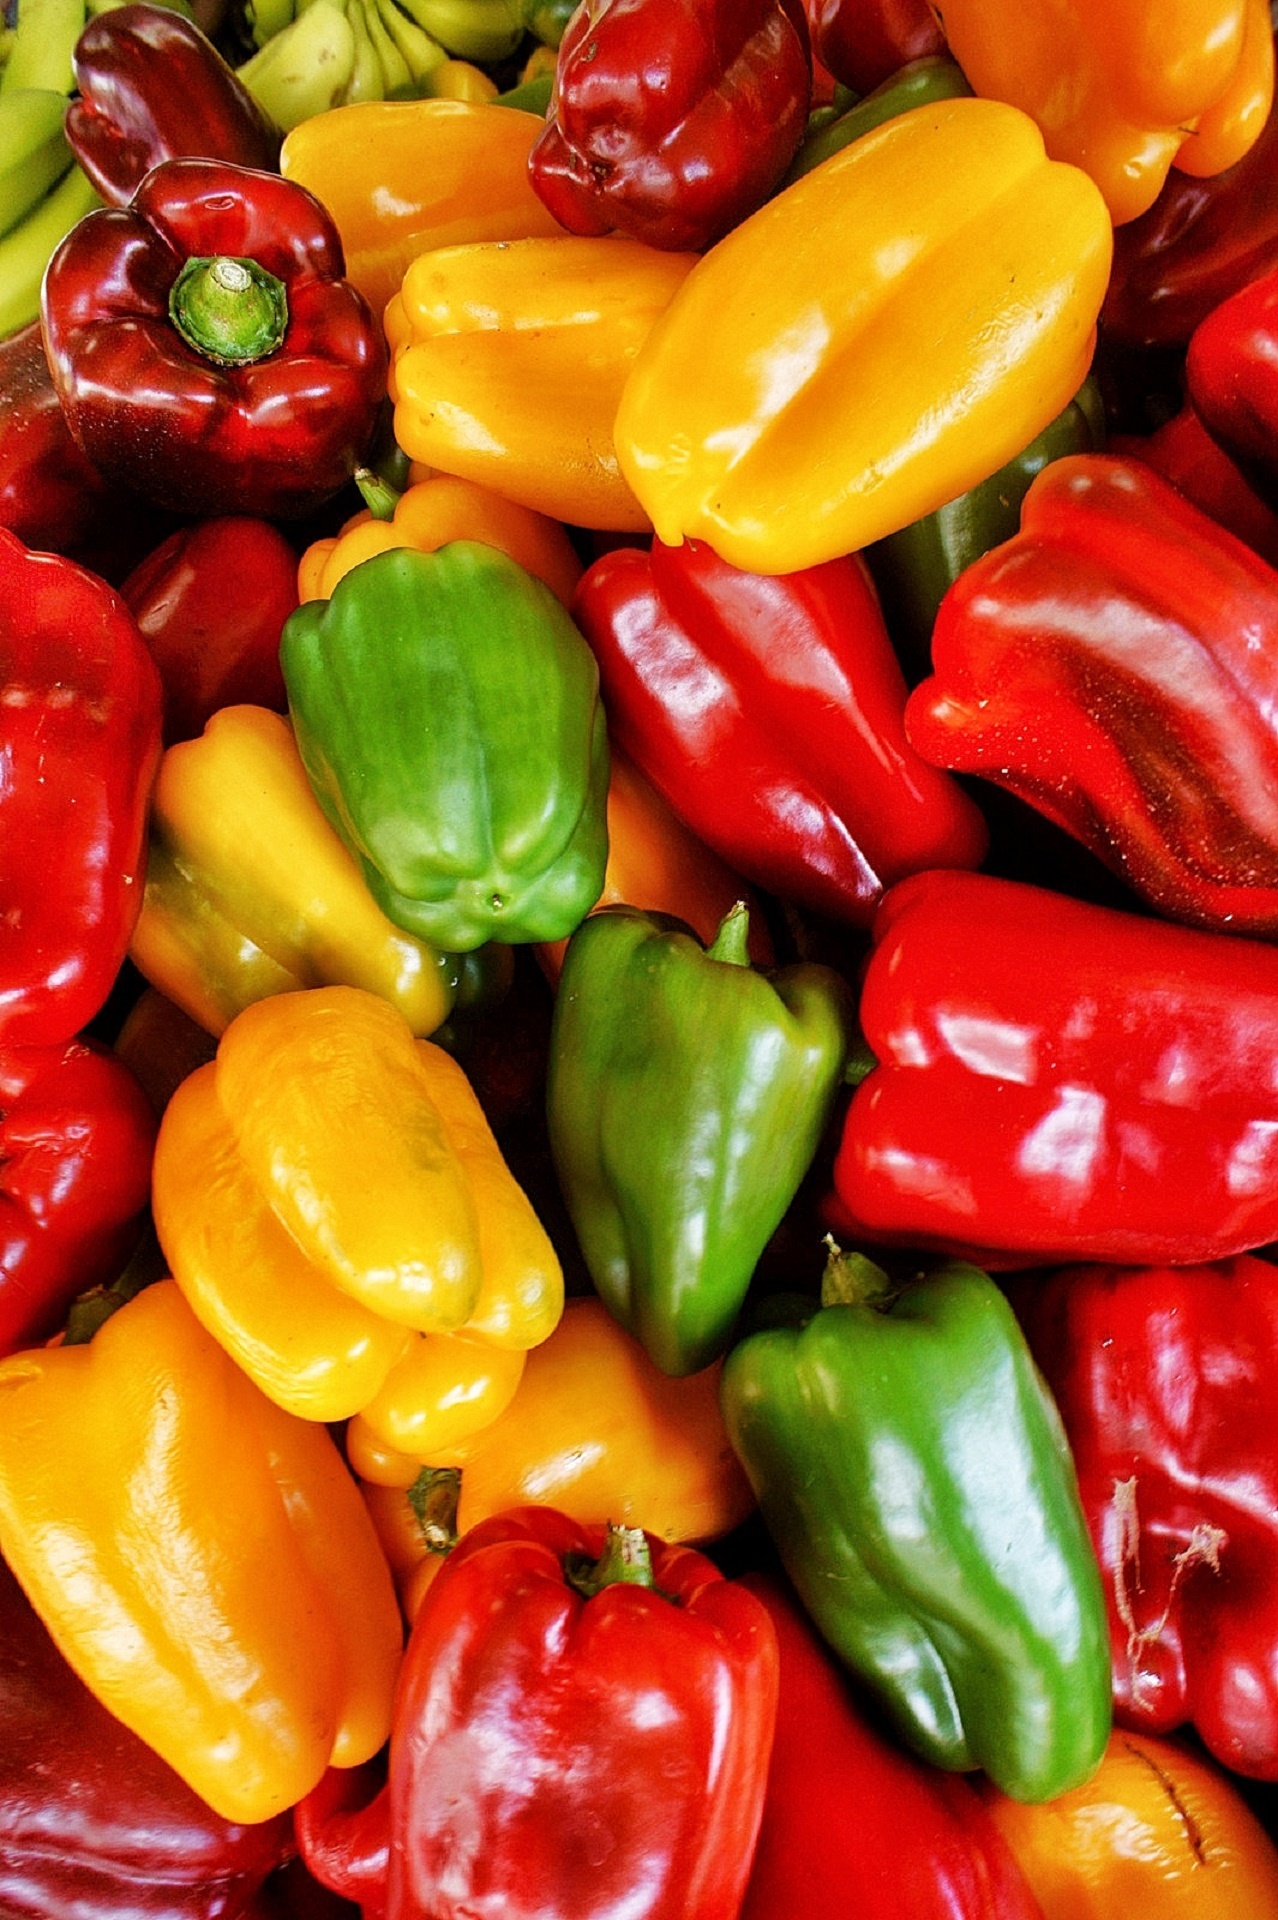 Colorful collection of varieties of bell peppers